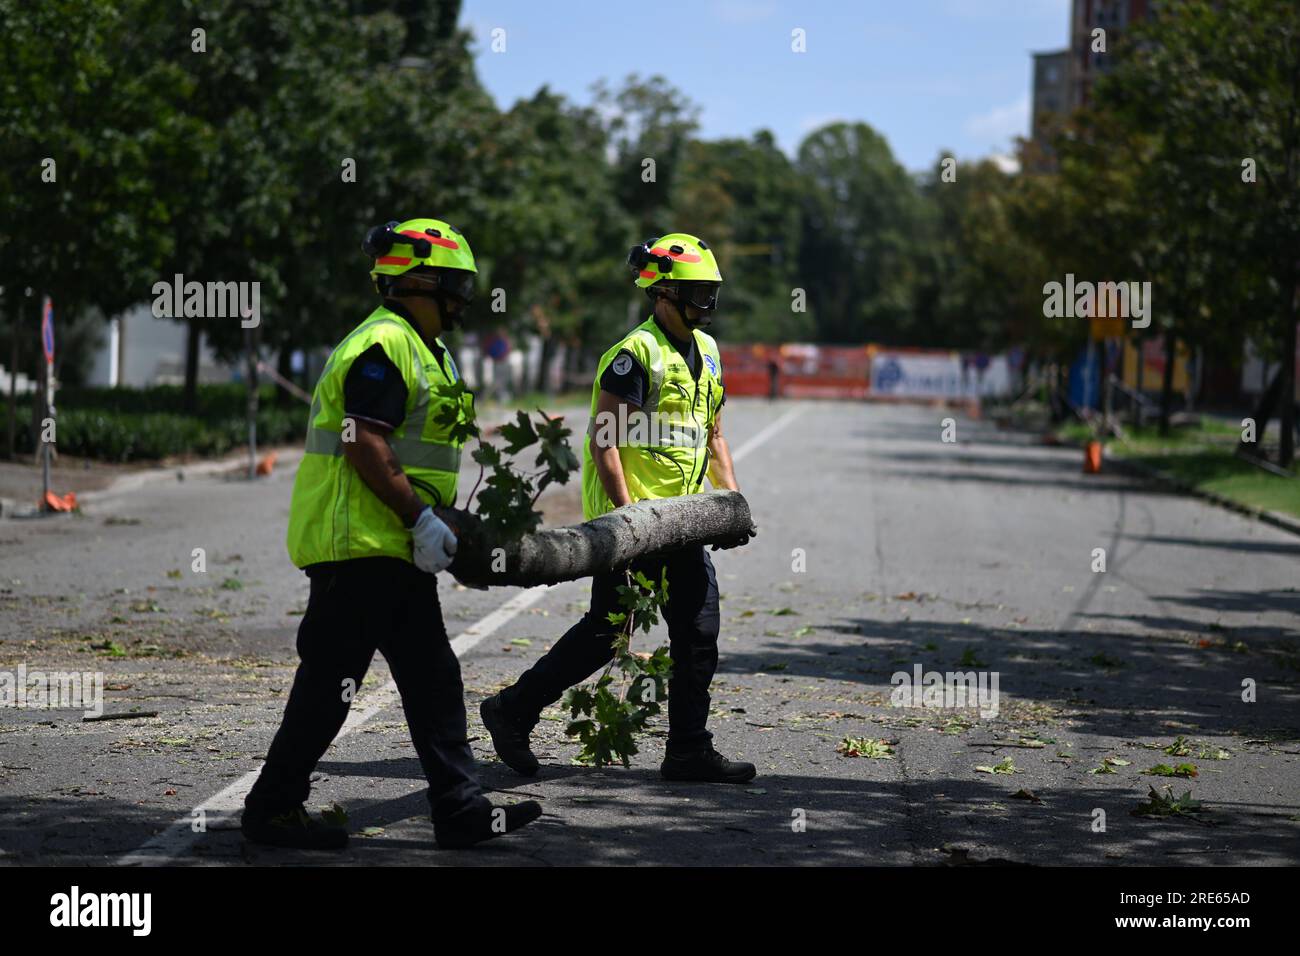 Milan, Italy. 25th July, 2023. Workers remove a fallen branch after thunderstorms in Milan, Italy, on July 25, 2023. While the southern two-thirds of Italy struggled under the oppressive heat, most of the northern area was pelted by thunderstorms and over-sized hail. Media reports said the emergency services in Milan had responded to more than 200 requests for help related to flooding, fallen trees, and damage to cars and homes, since a severe storm hit the city late Monday. Credit: Str/Xinhua/Alamy Live News Stock Photo